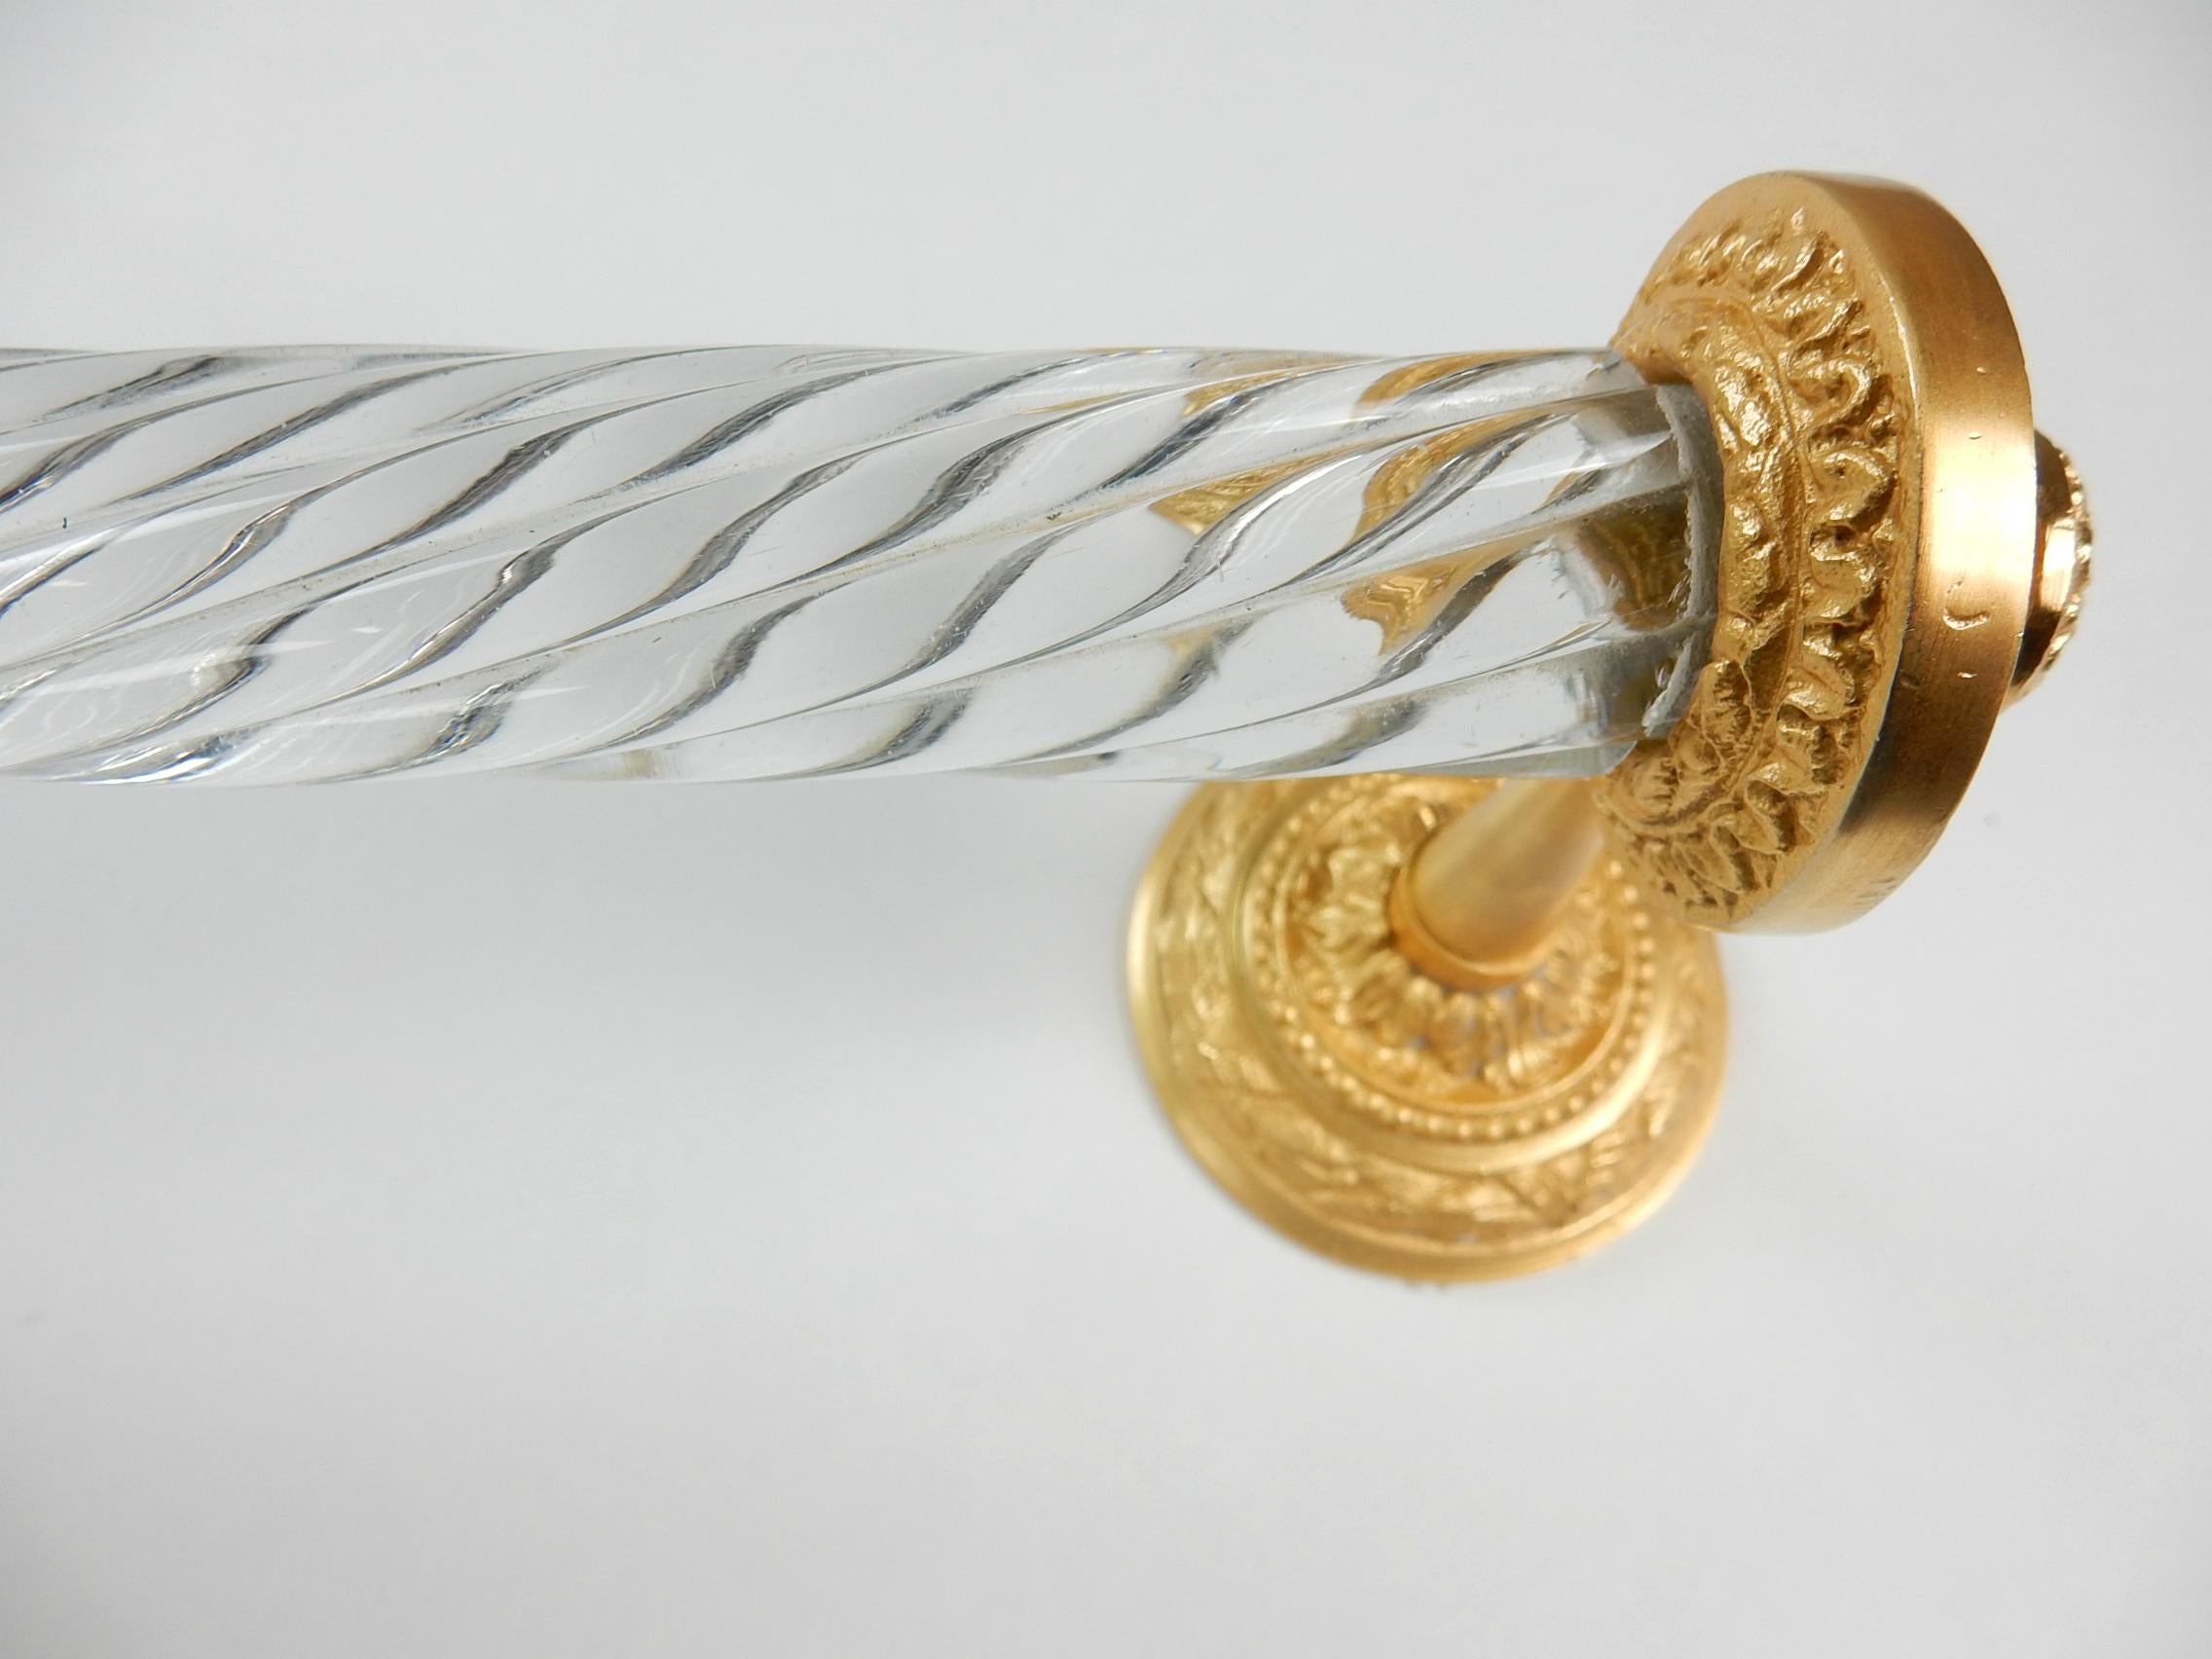 From the Sherle Wagner collection, this gorgeous spiral glass towel bar
with ornate 22kt gold plated end caps.
20 inches in length(17-1/2 glass bar), circa 1960s.